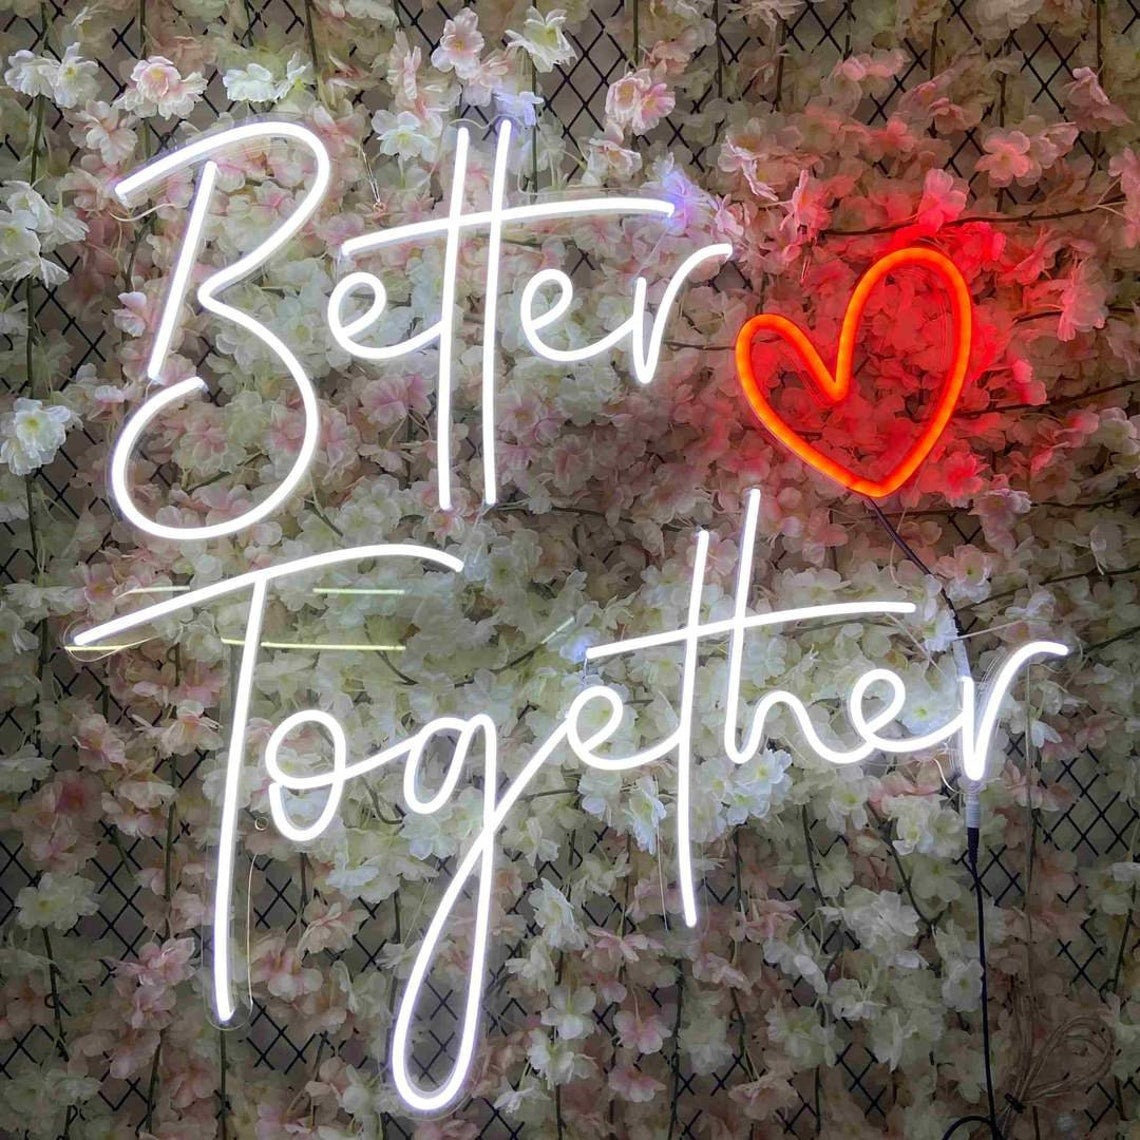 "Better Together" neon sign combined with a heart symbol